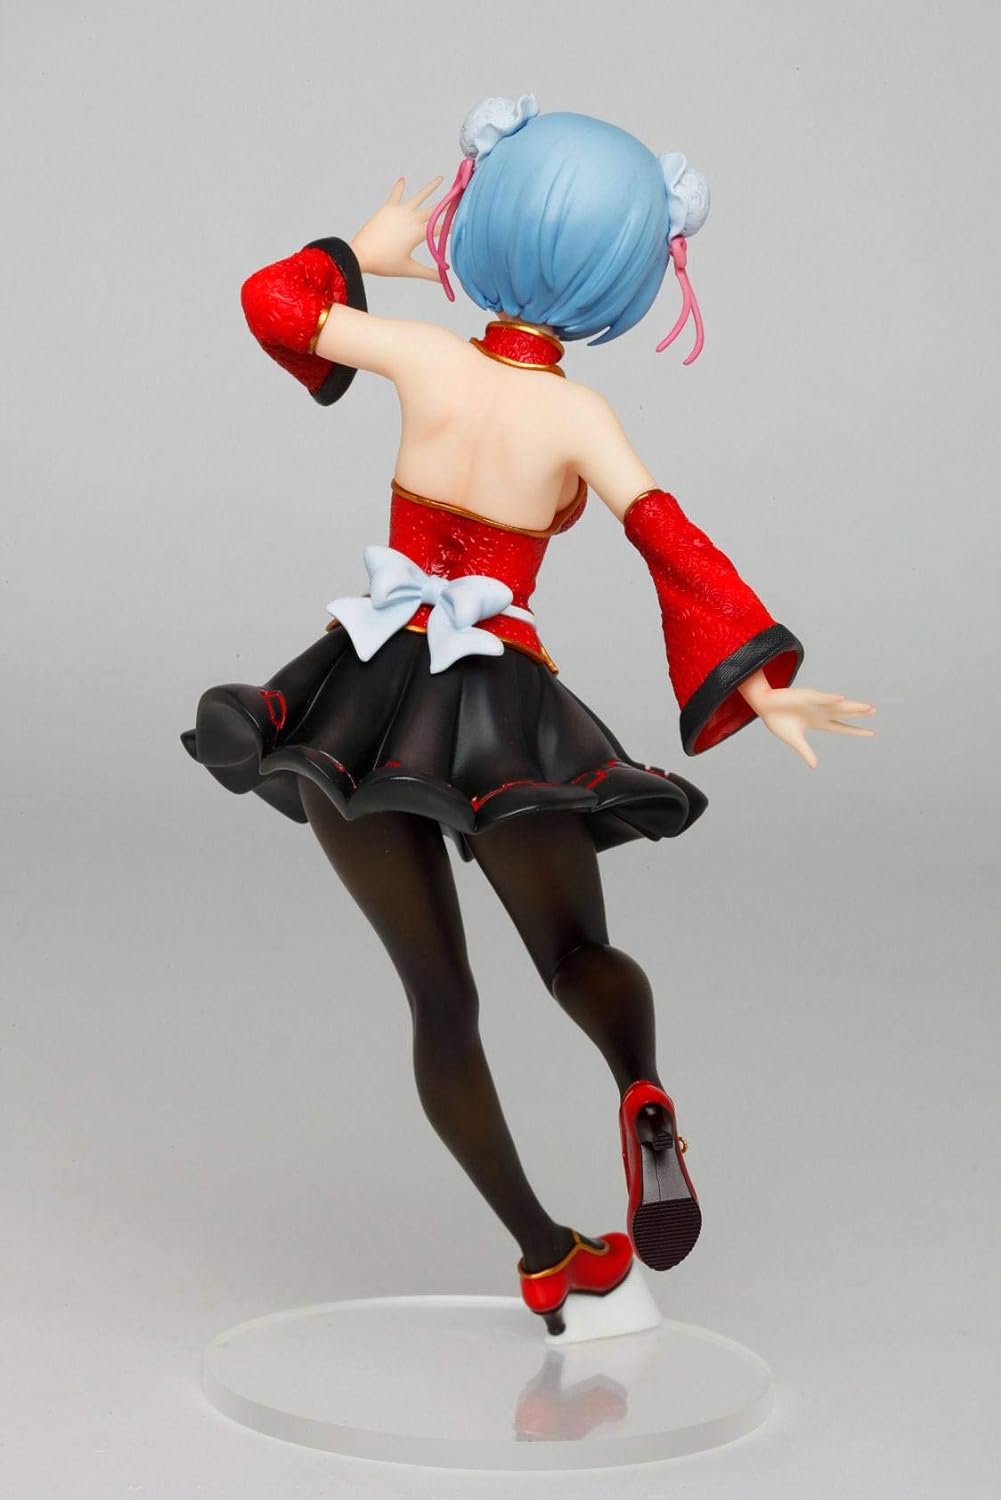 Re:Zero - Starting Life in Another World - Precious Figures - Rem - China Maid Ver. | animota